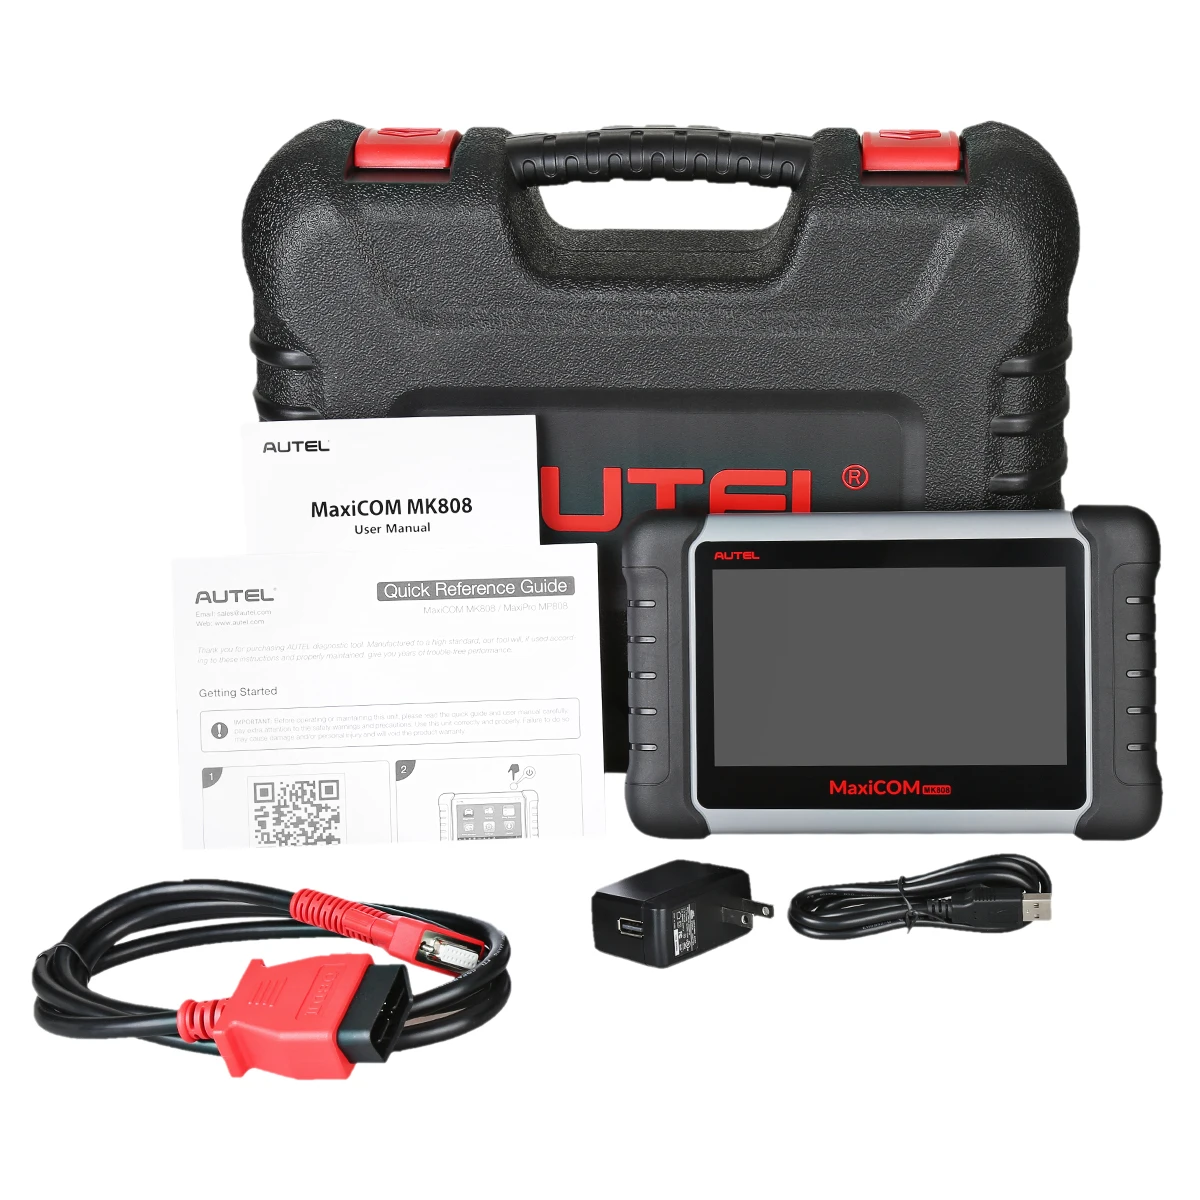 

Best selling Autel MaxiCOM MK808 mk 808 obd2 diagnostic cars scanner tool with all system